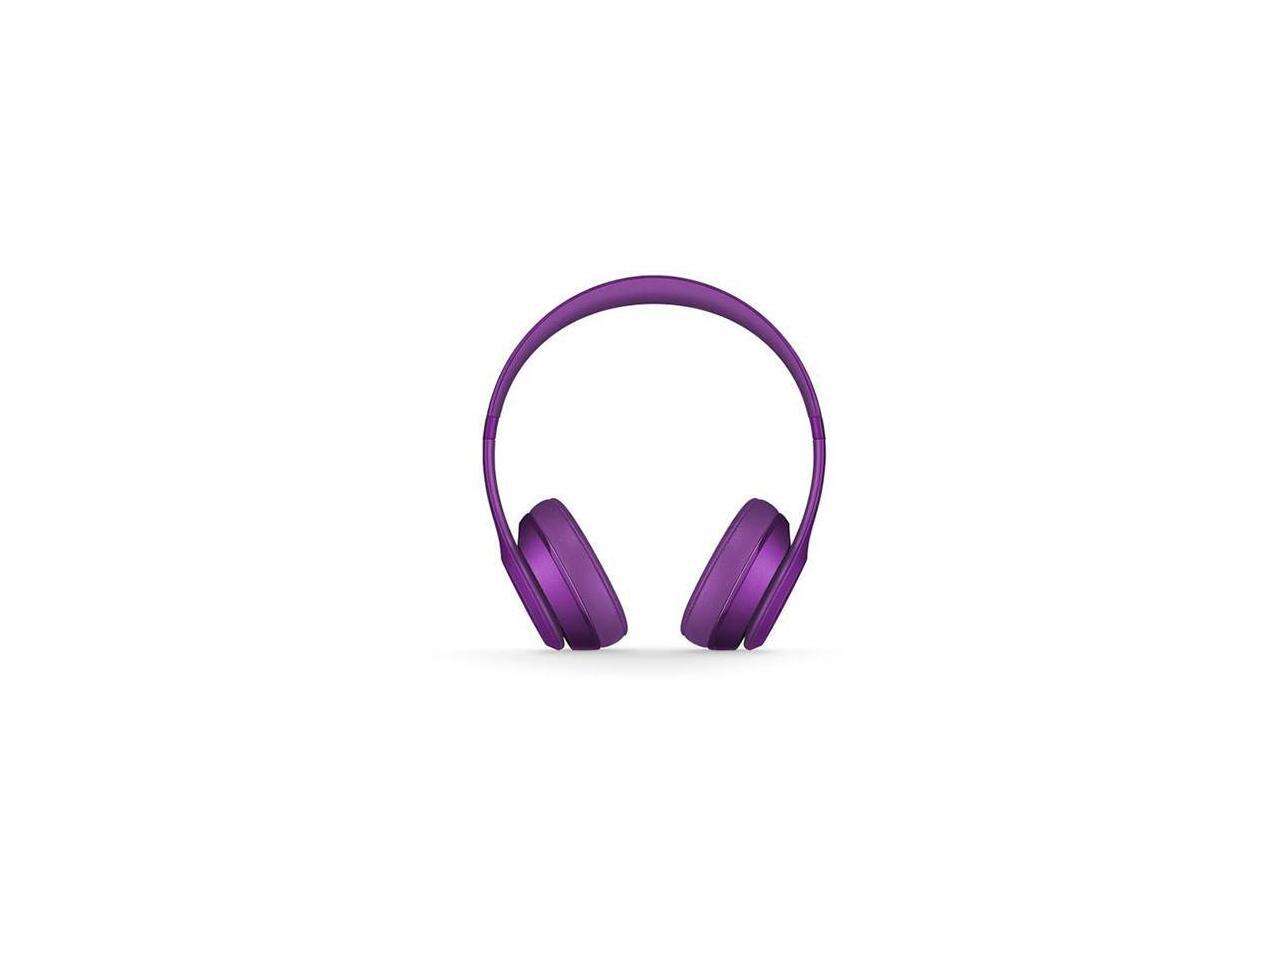 Beats by Dr. Dre Solo2 On-Ear Headphones, 3.5 mm Jack, Imperial Violet #MJXV2AMA